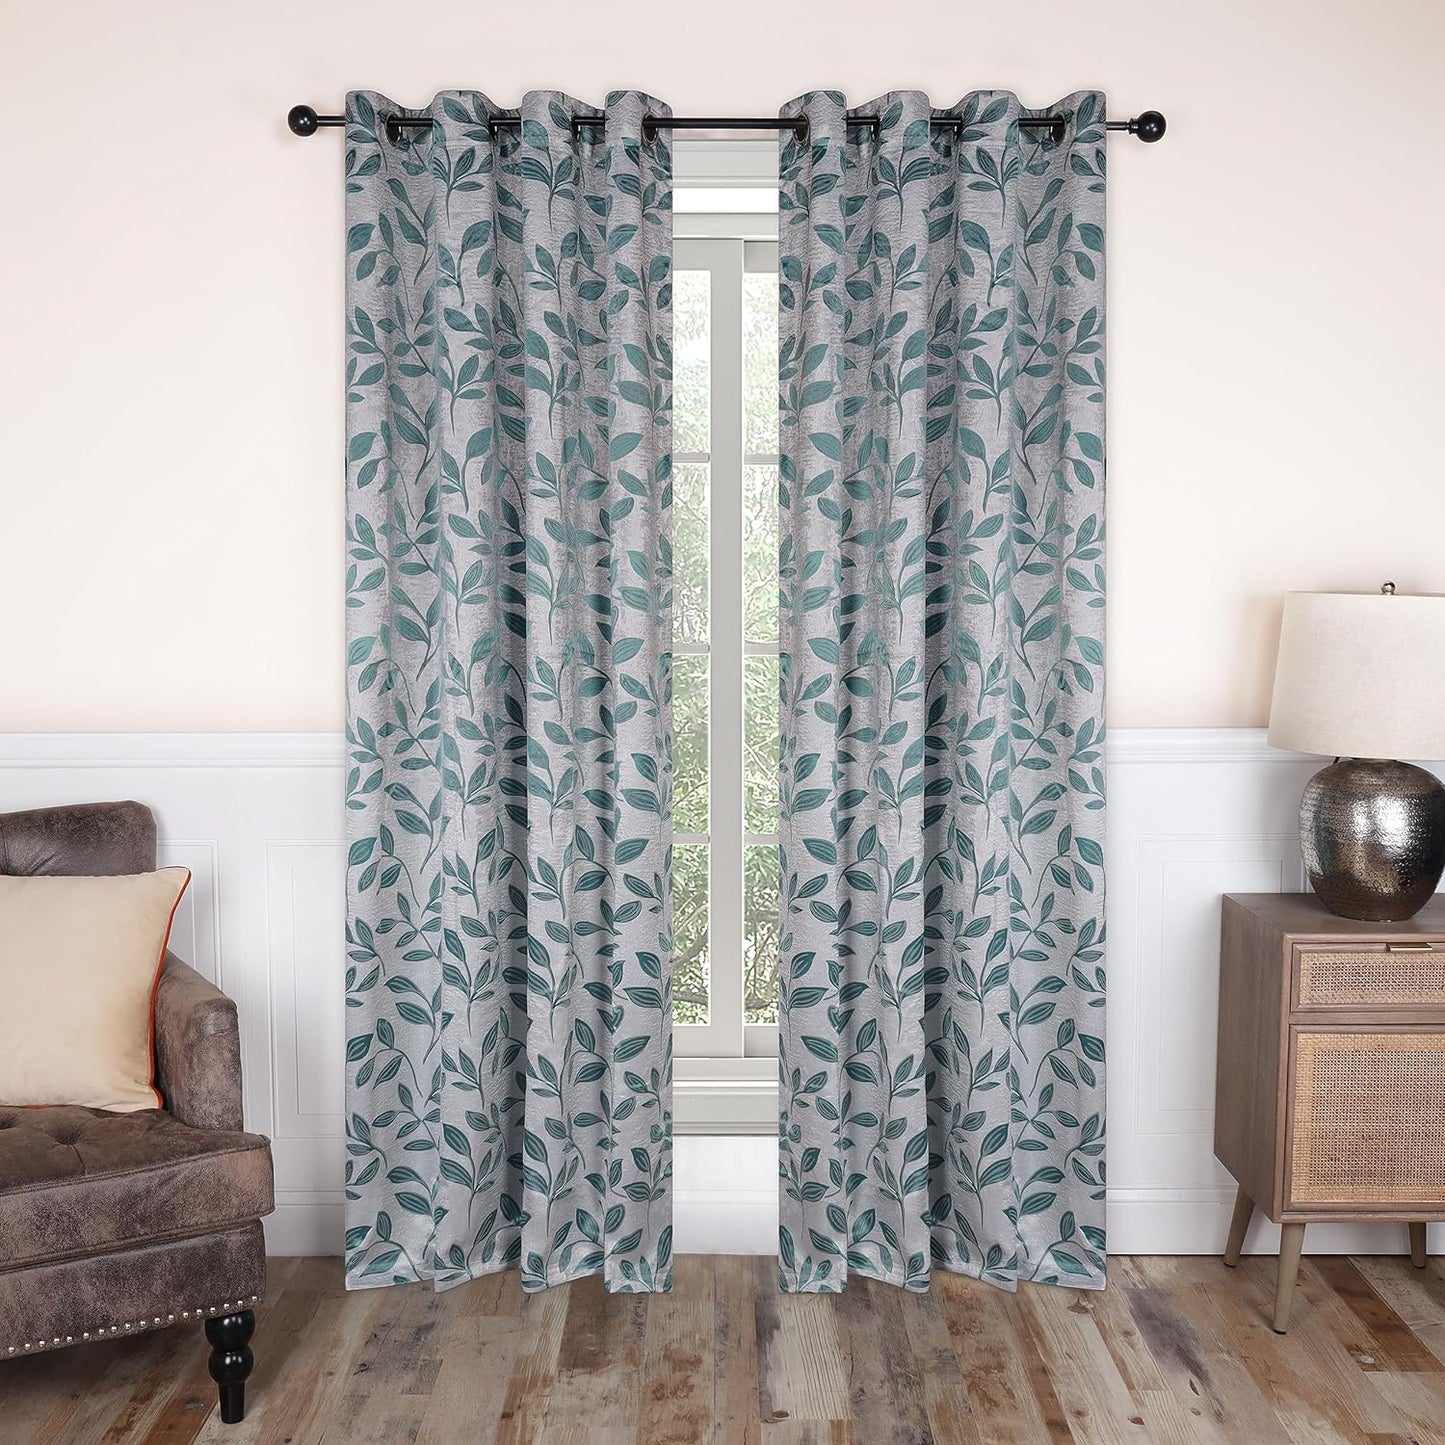 Superior Blackout Curtains, Room Darkening Window Accent for Bedroom, Sun Blocking, Thermal, Modern Bohemian Curtains, Leaves Collection, Set of 2 Panels, Rod Pocket - 52 in X 63 In, Nickel Black  Home City Inc. Teal 52 In X 72 In (W X L) 